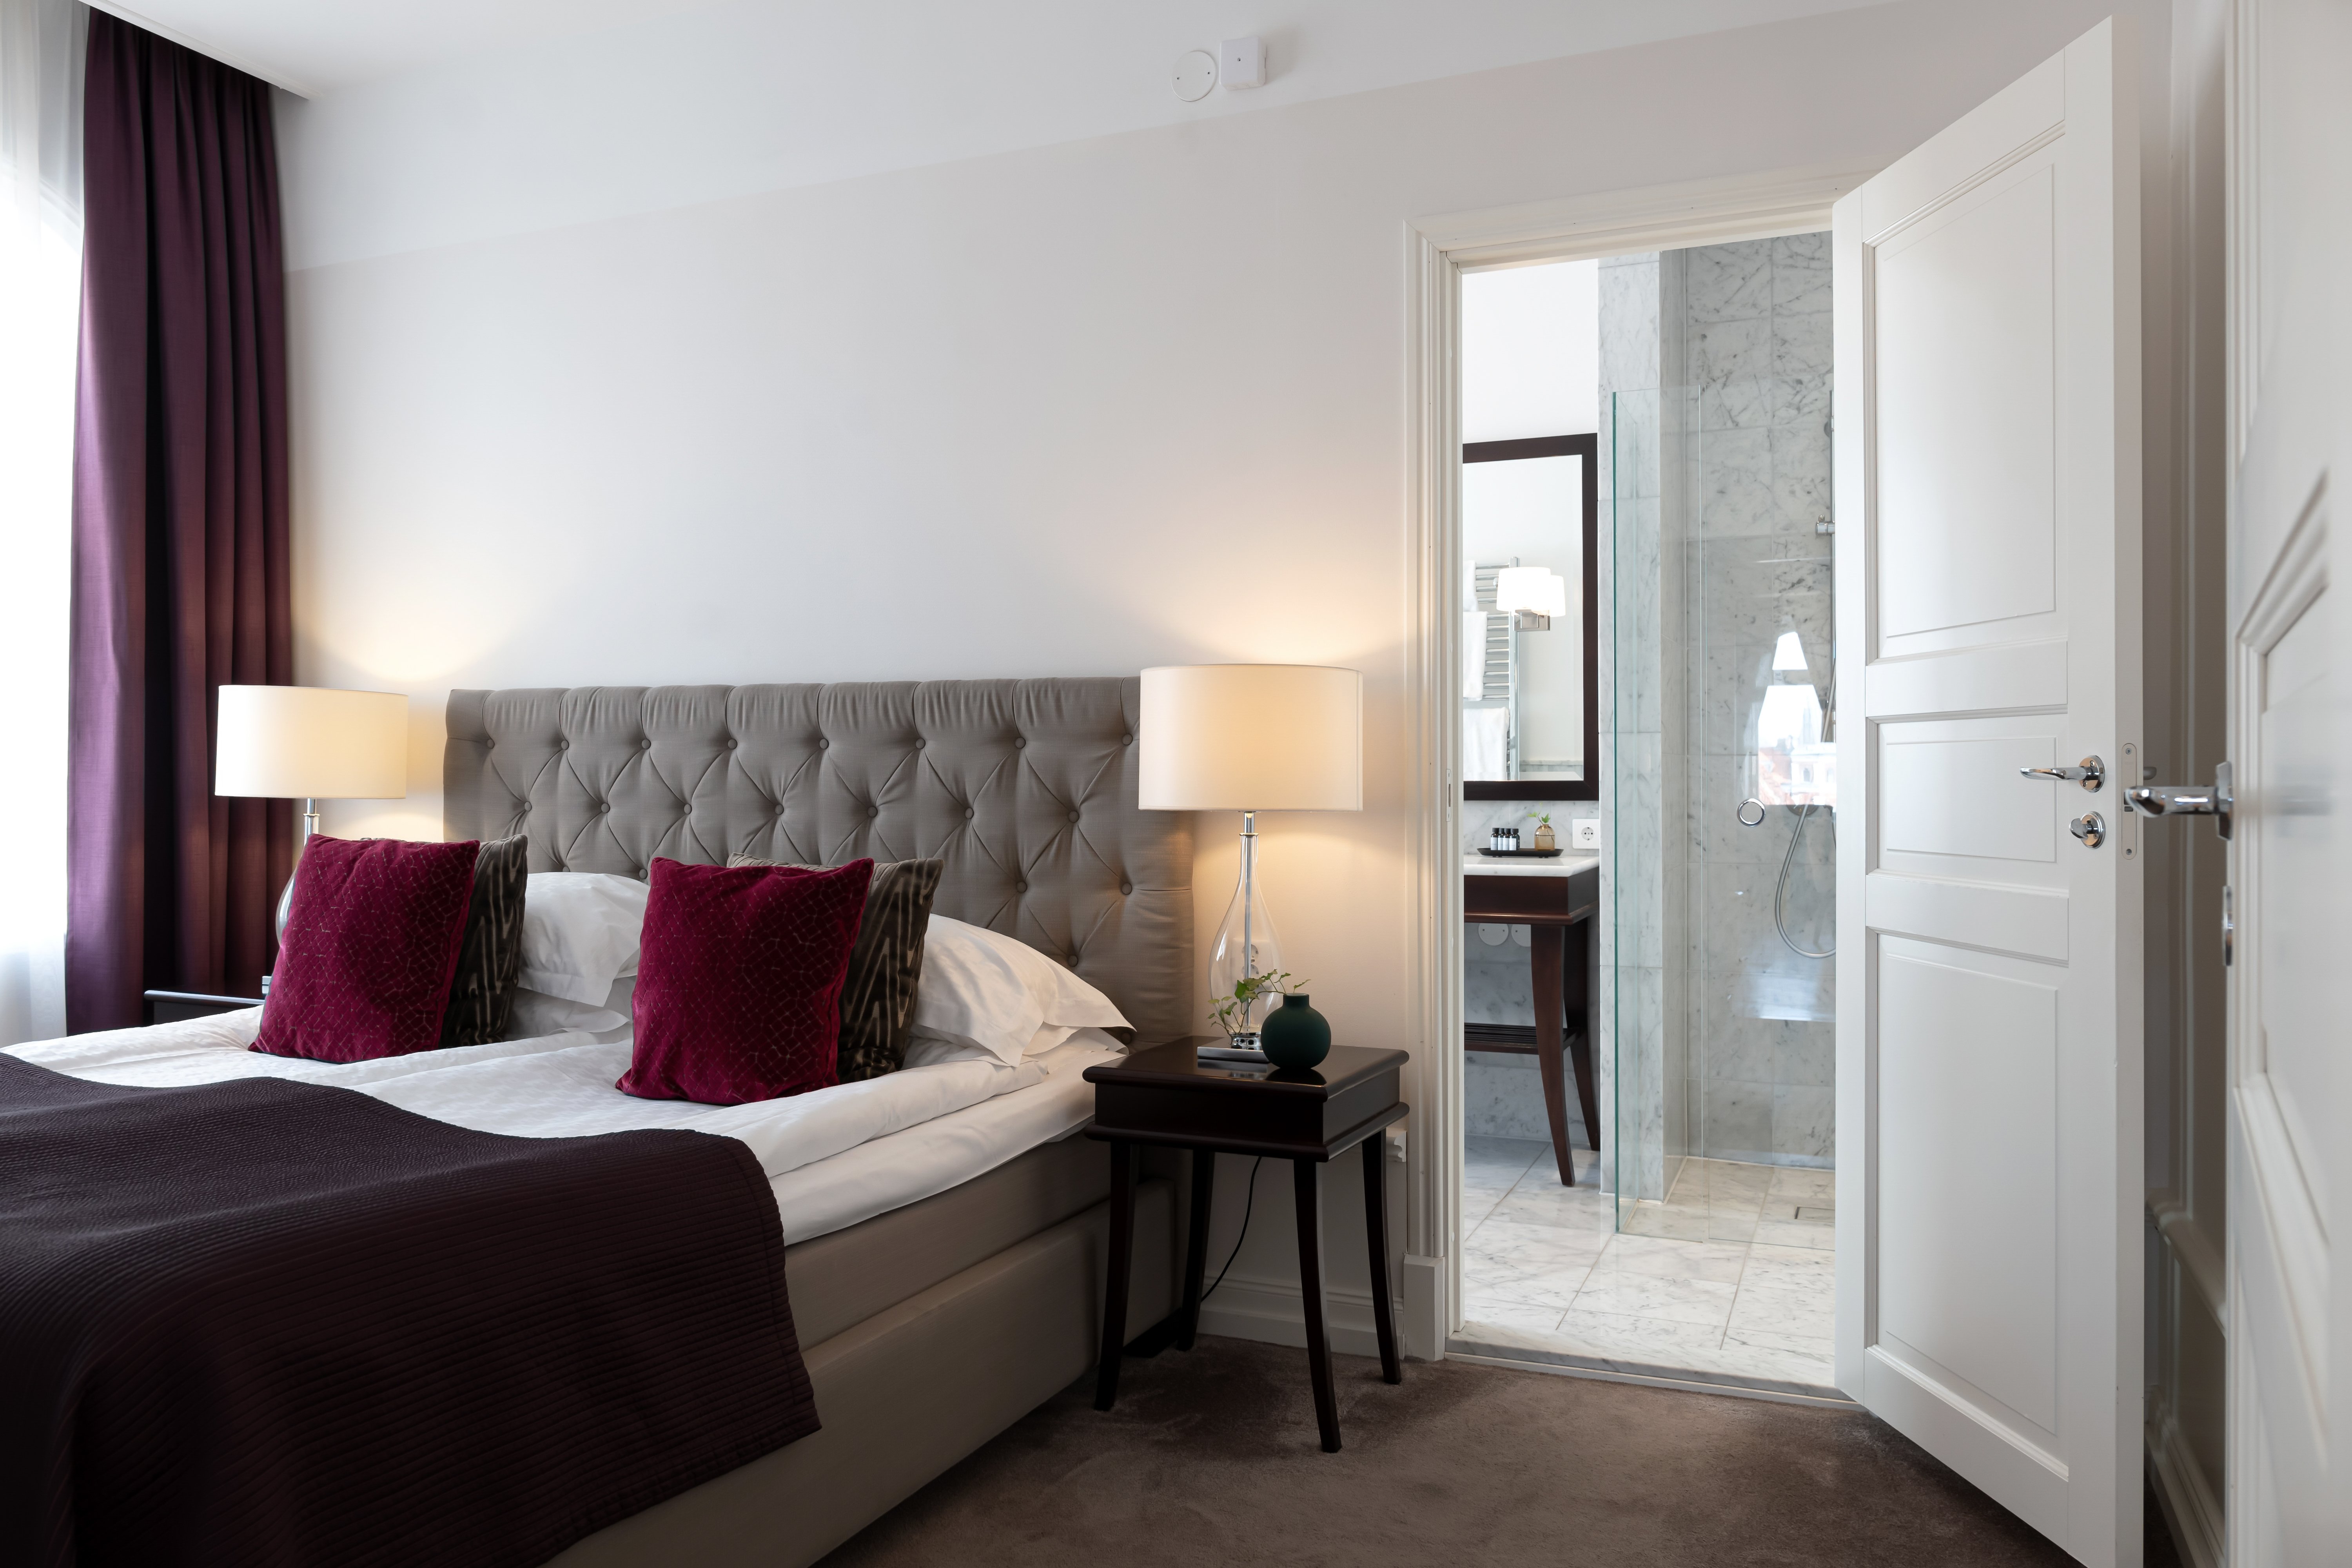 Suite with double bed, bedside lamps and door to bathroom